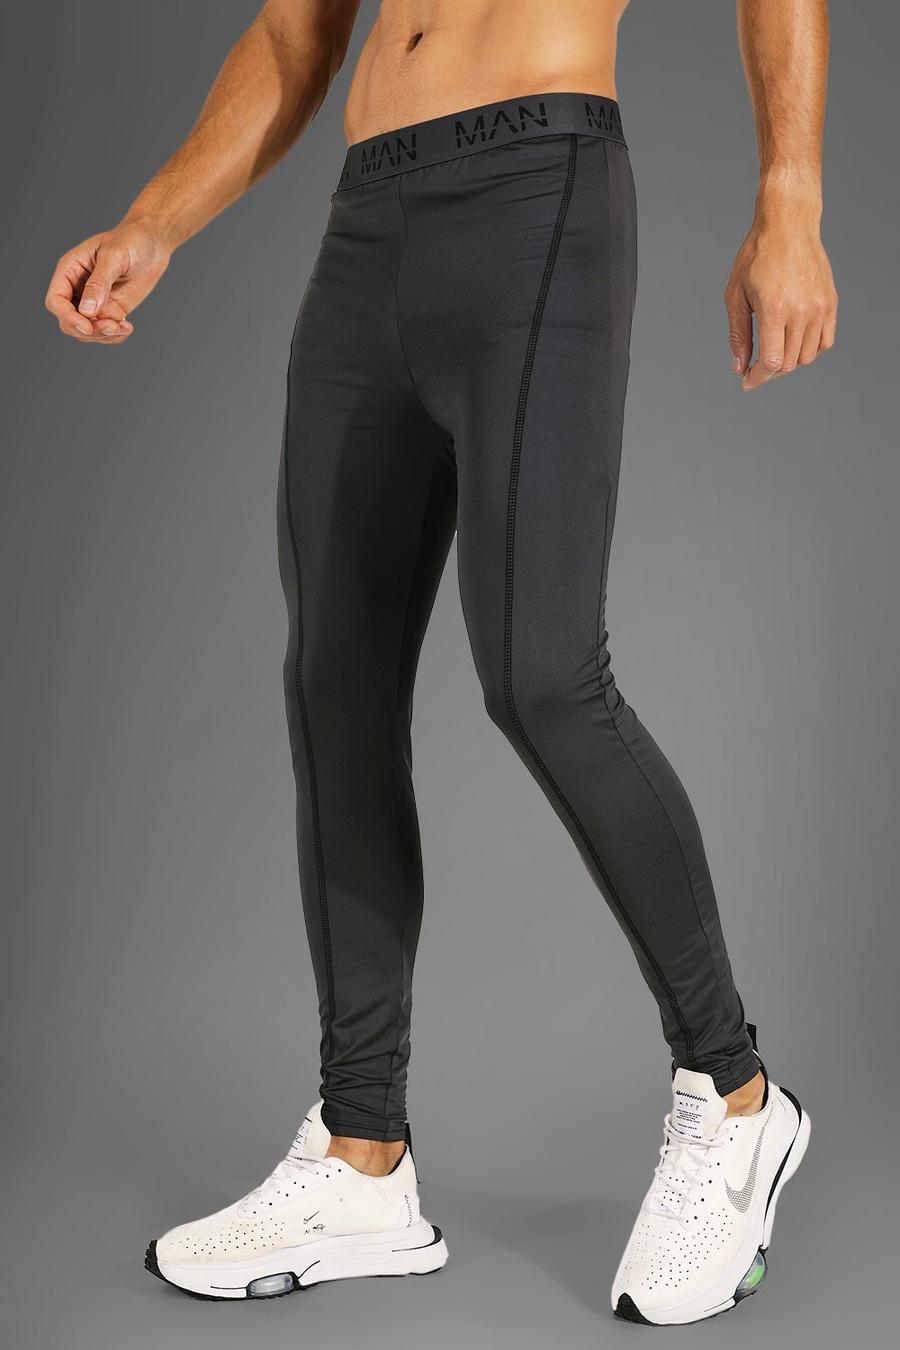 Legging Tall Man Active Gym a compressione, Charcoal image number 1